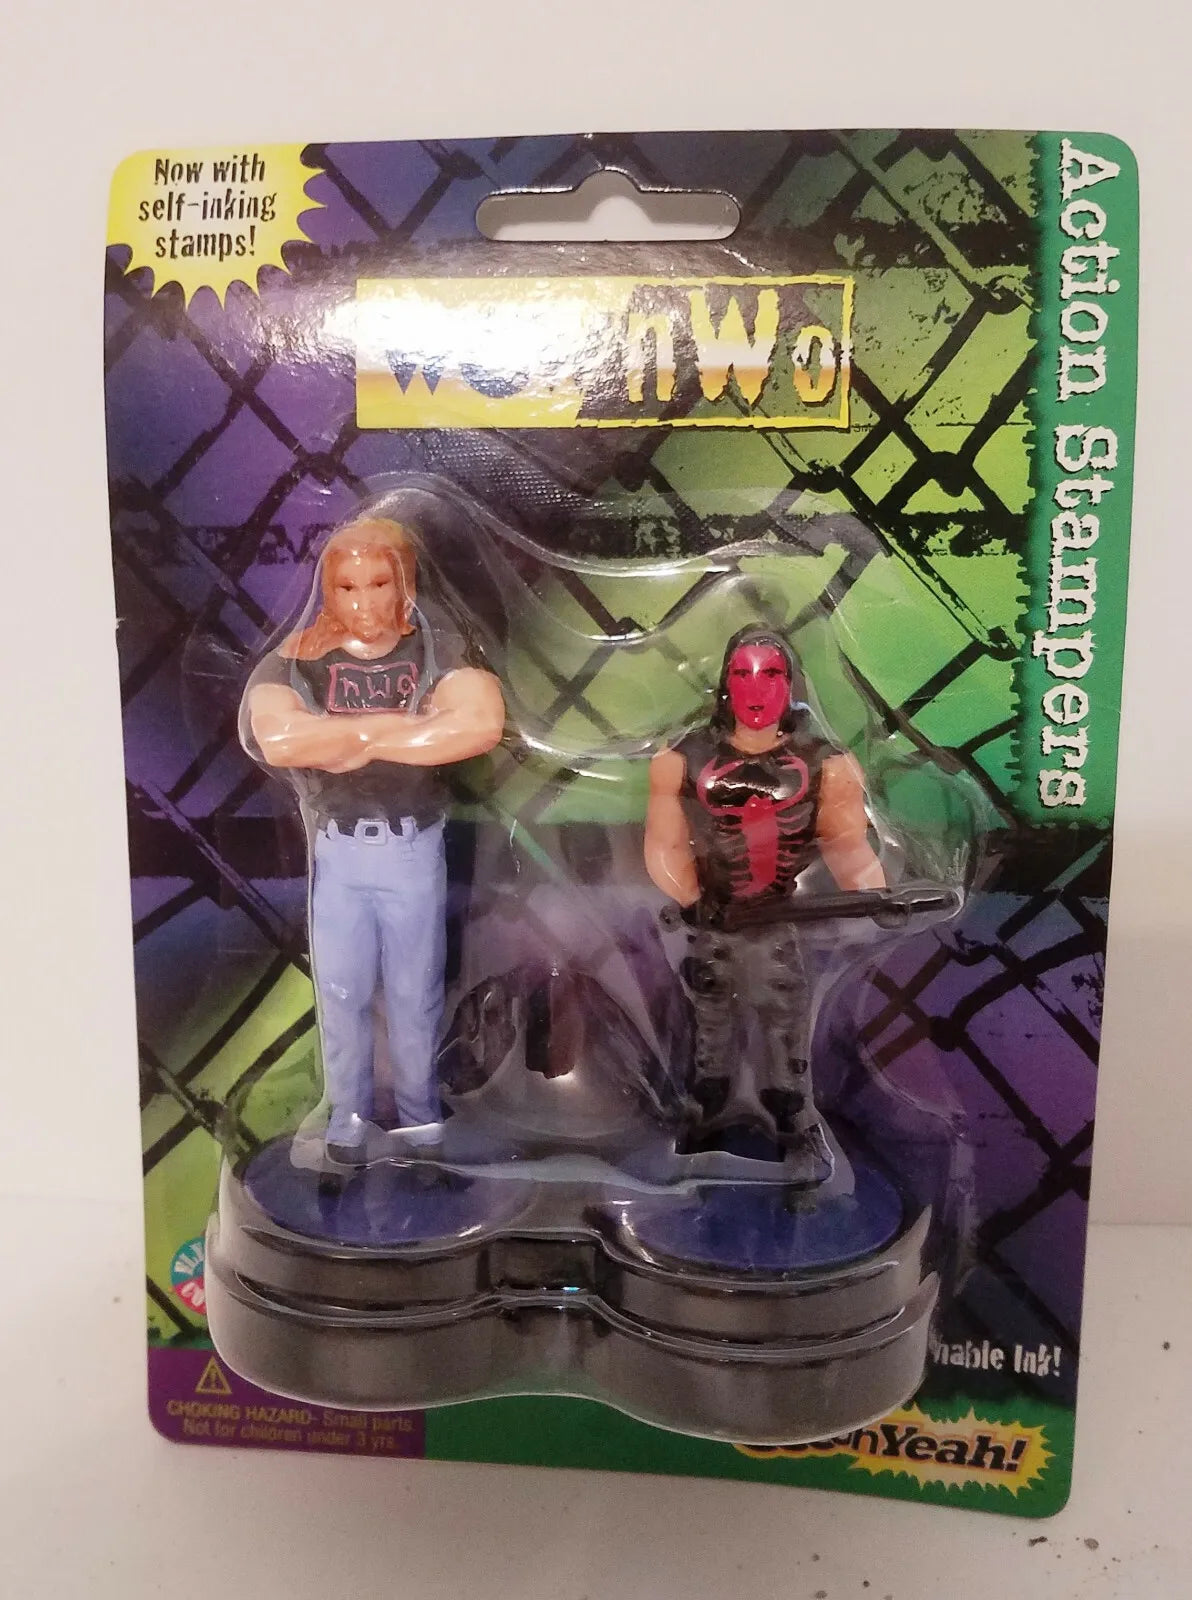 1998 WCW/nWo Colorbök Paper Products Kevin Nash & Sting Action Stampers